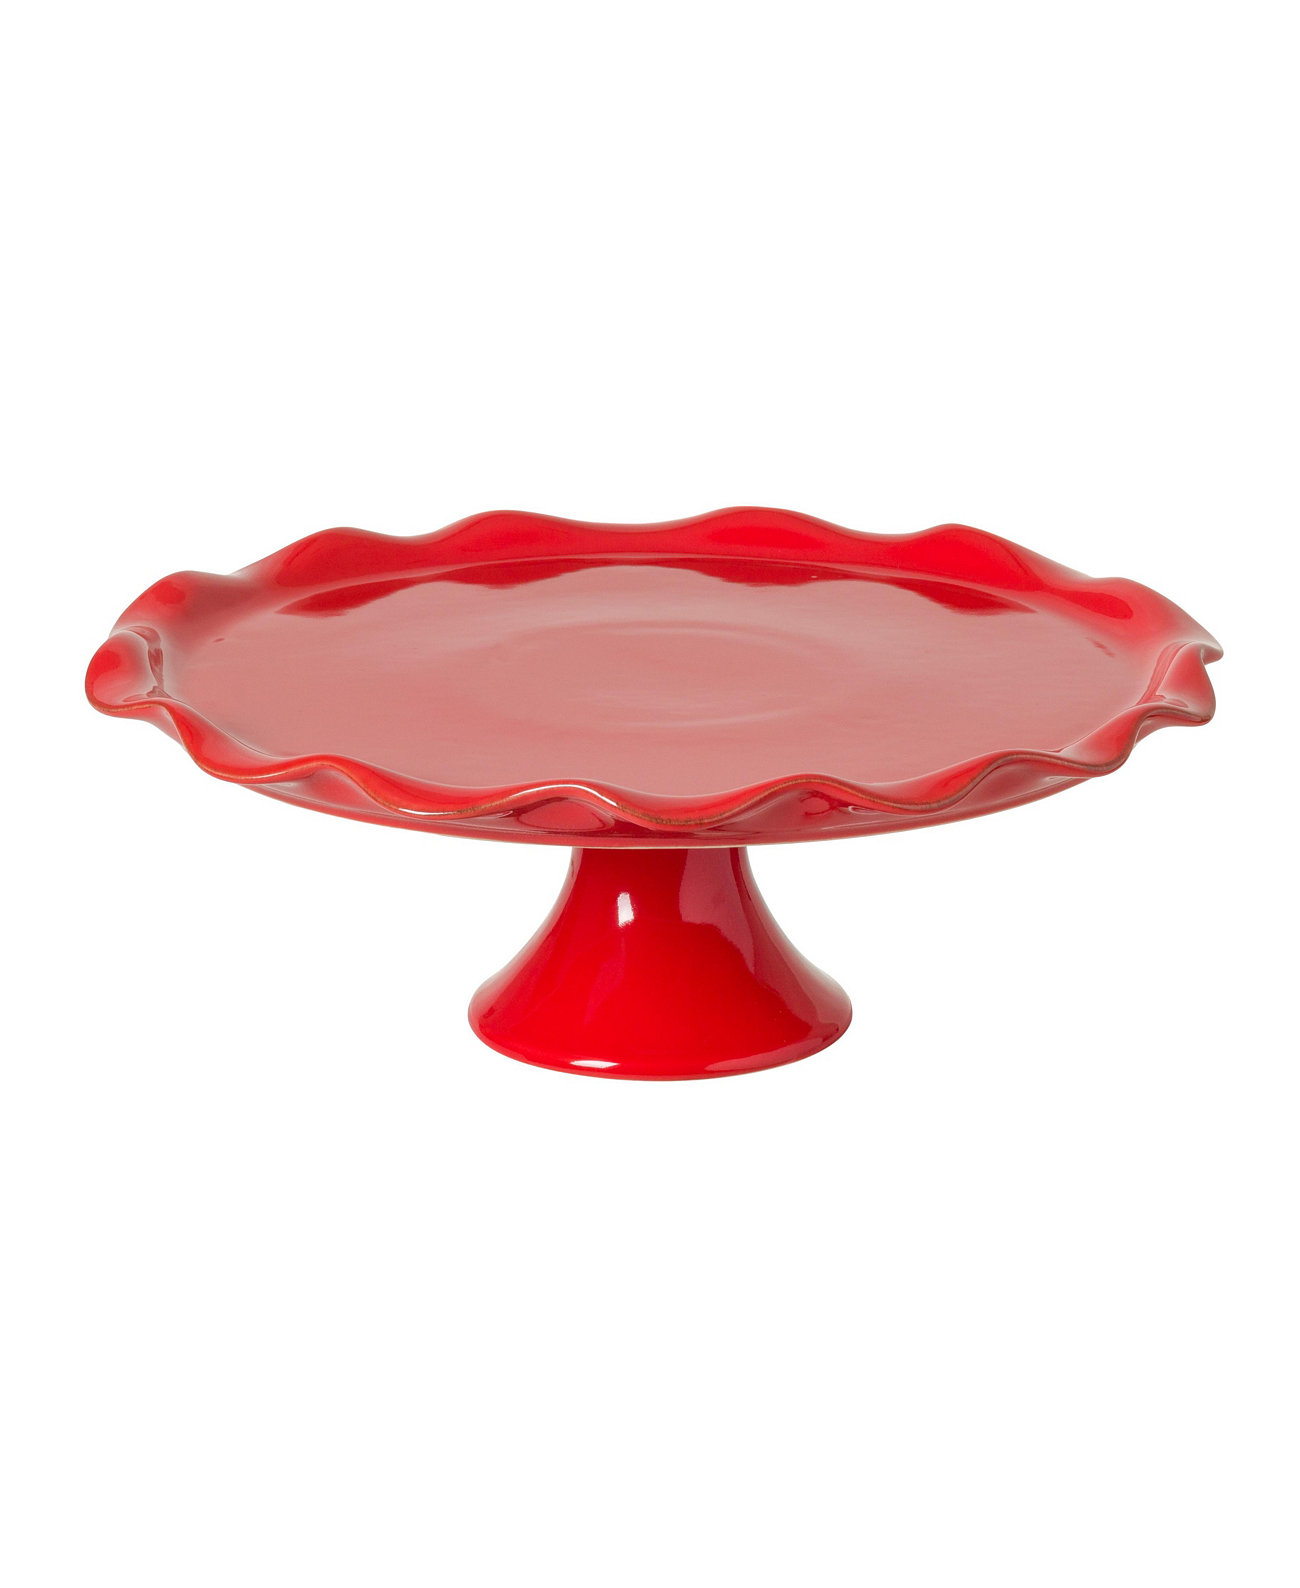 Cook & Host Large Red Footed Cake Plate Casafina